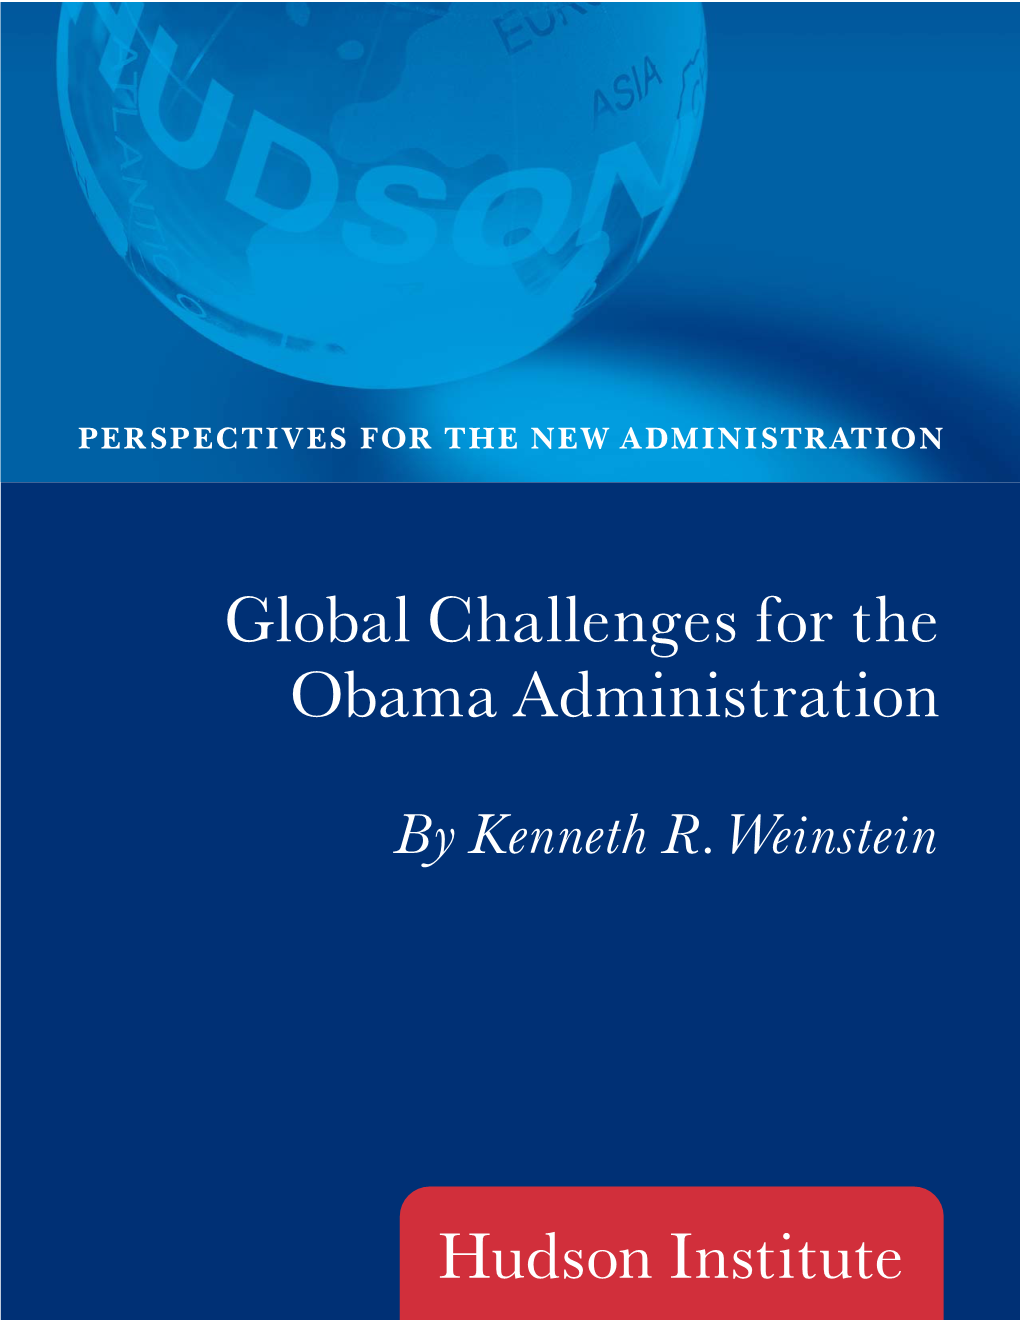 Global Challenges for the Obama Administration